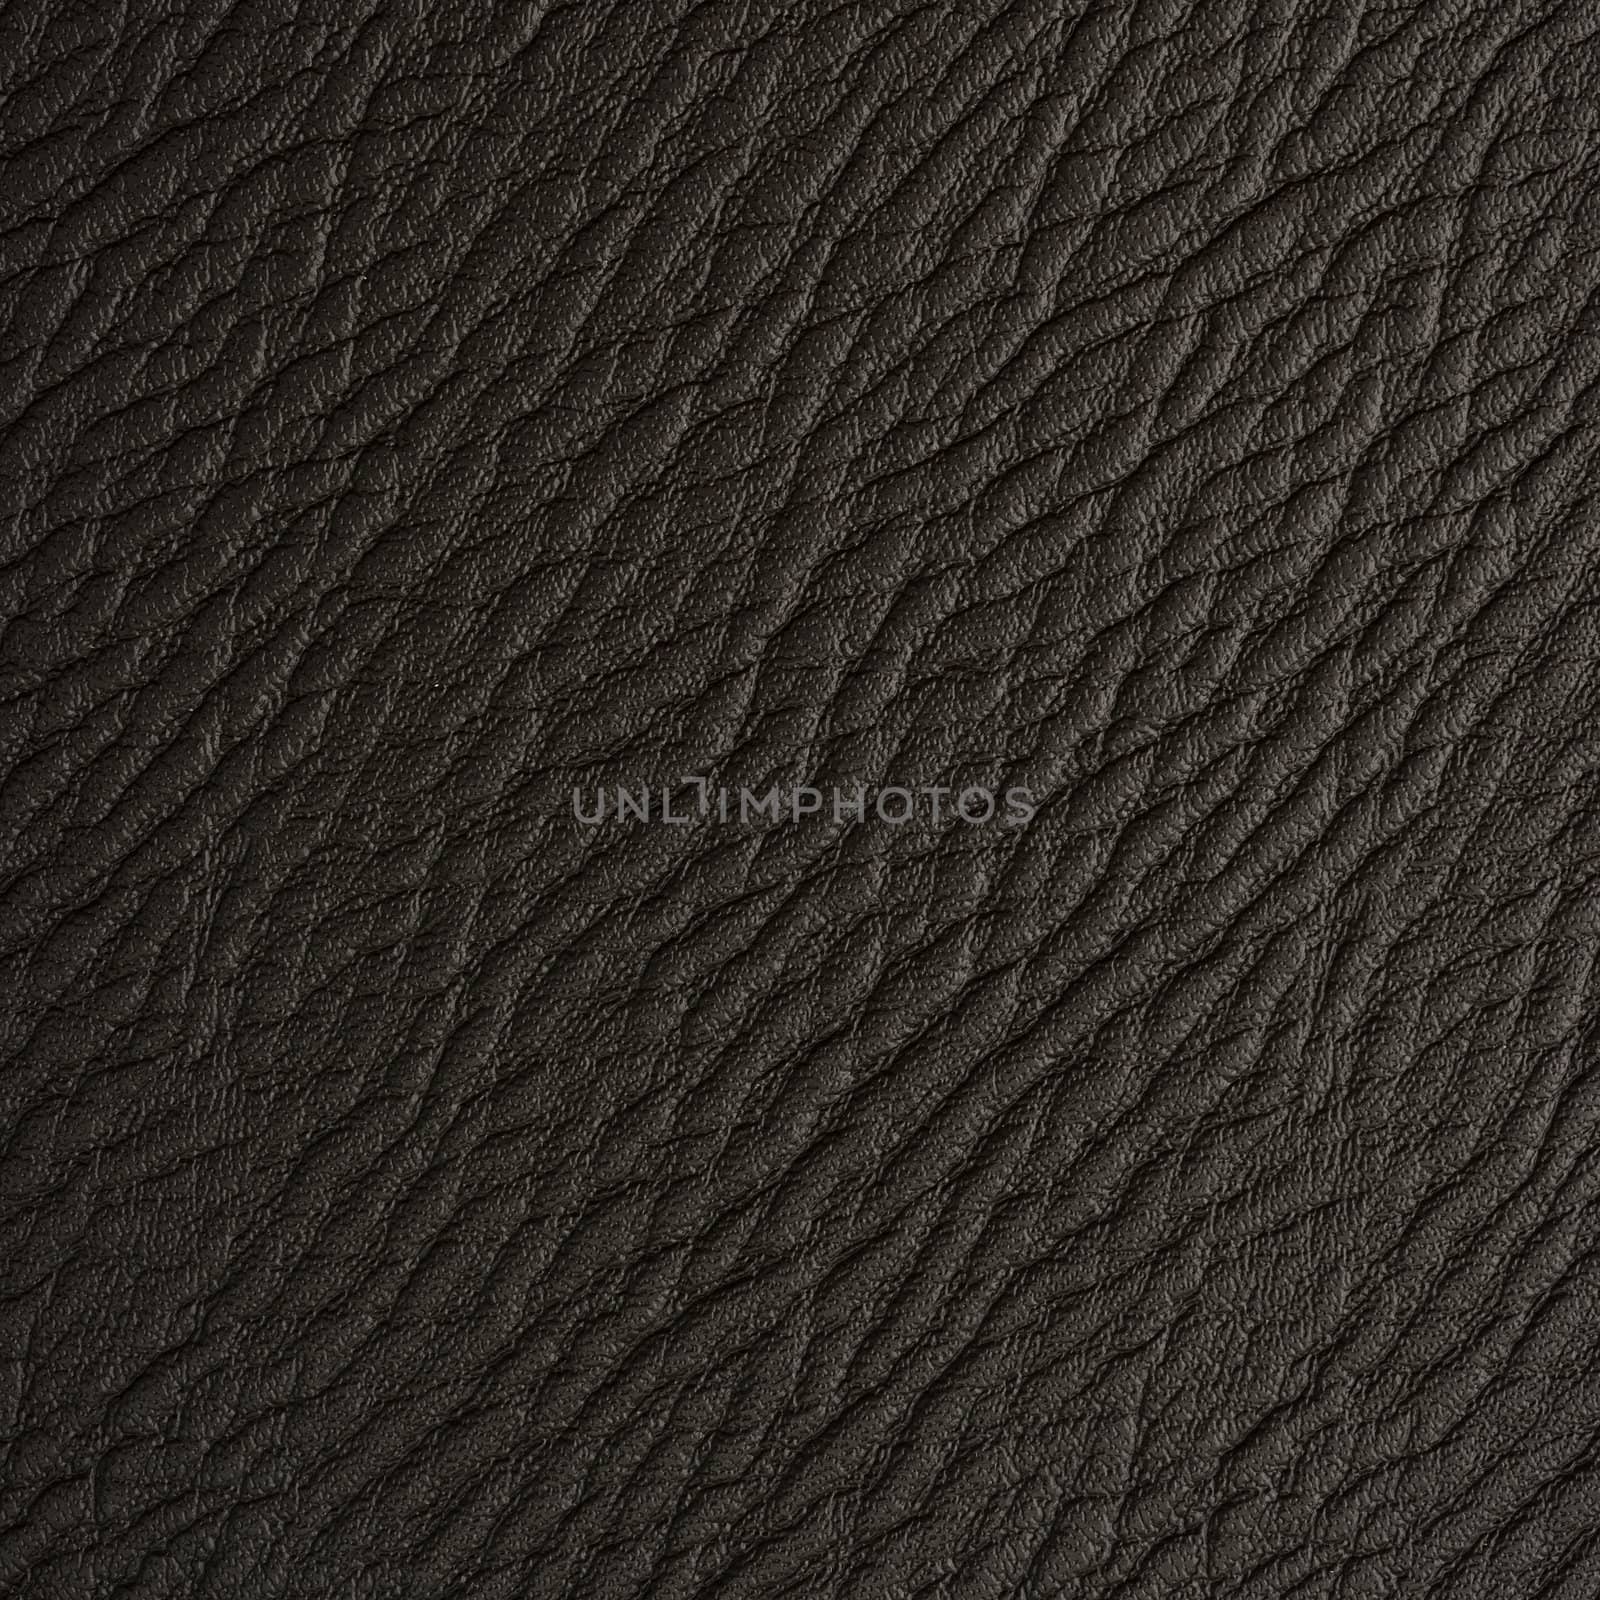 backgrounds of leather texture